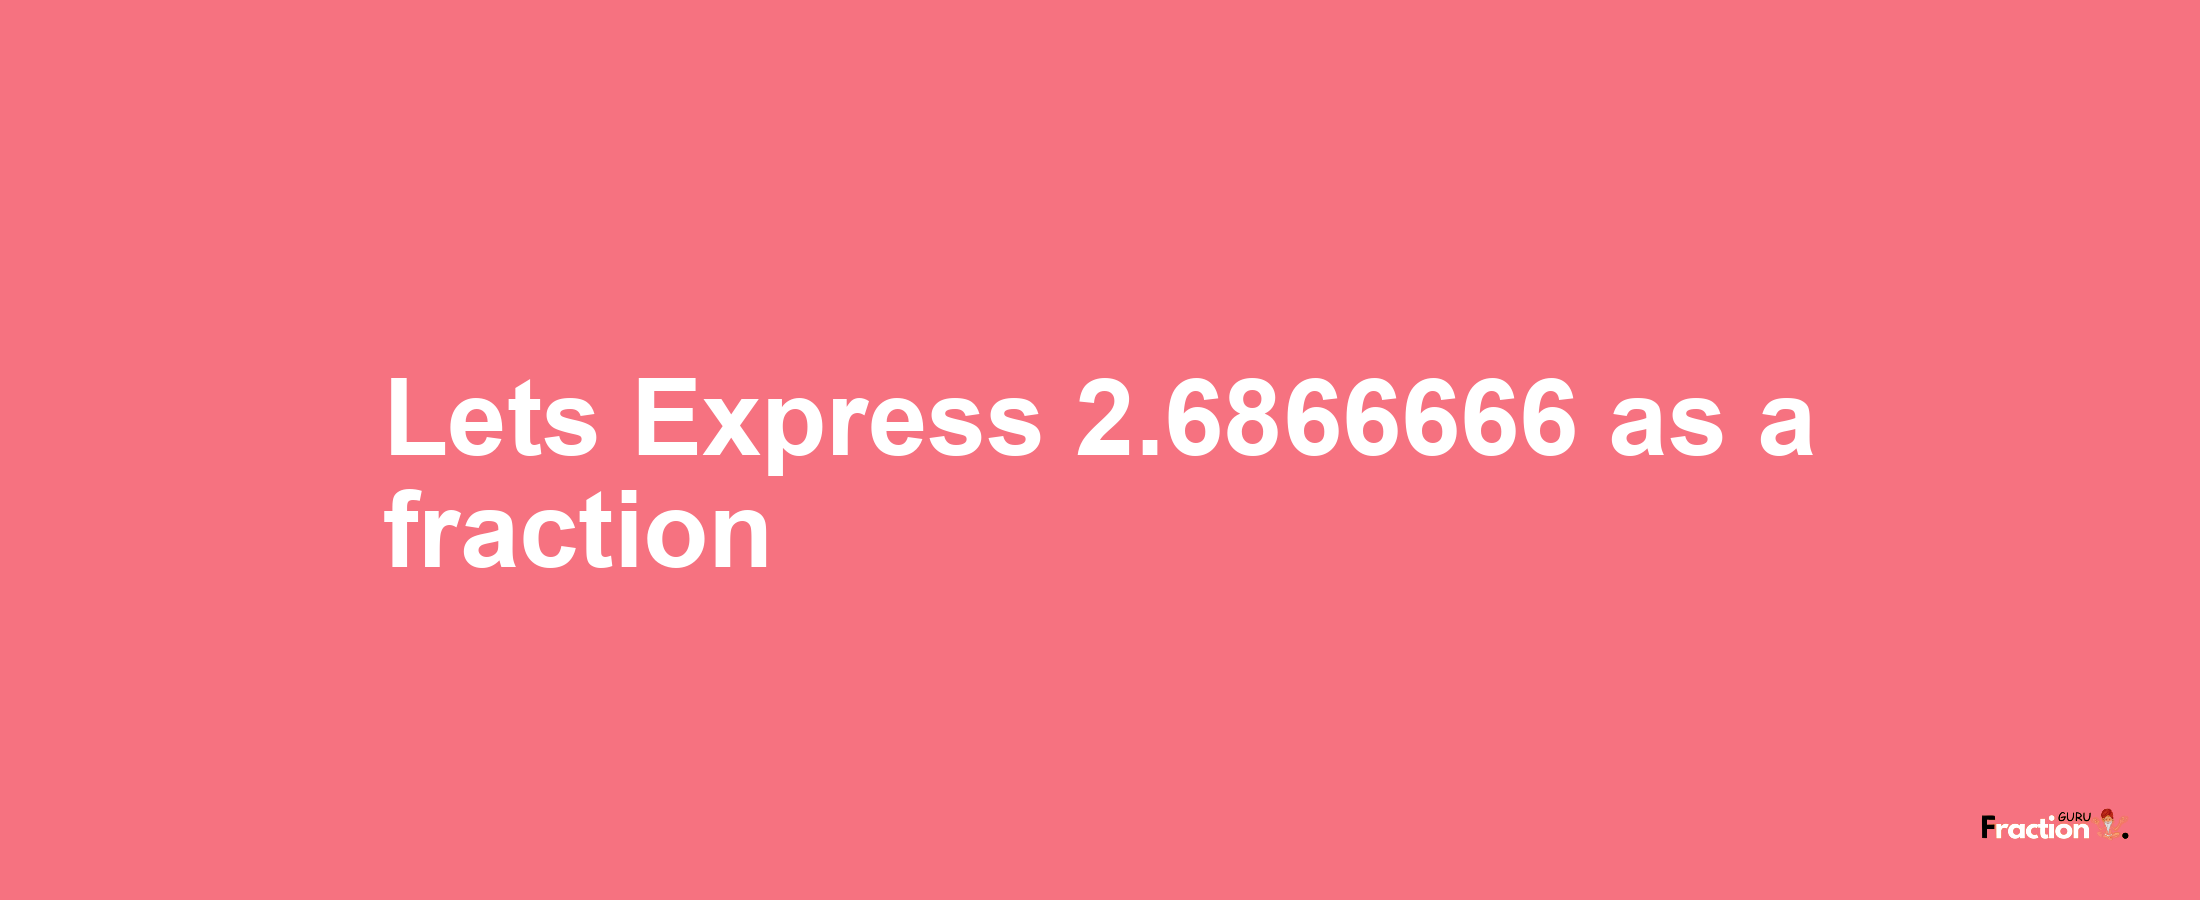 Lets Express 2.6866666 as afraction